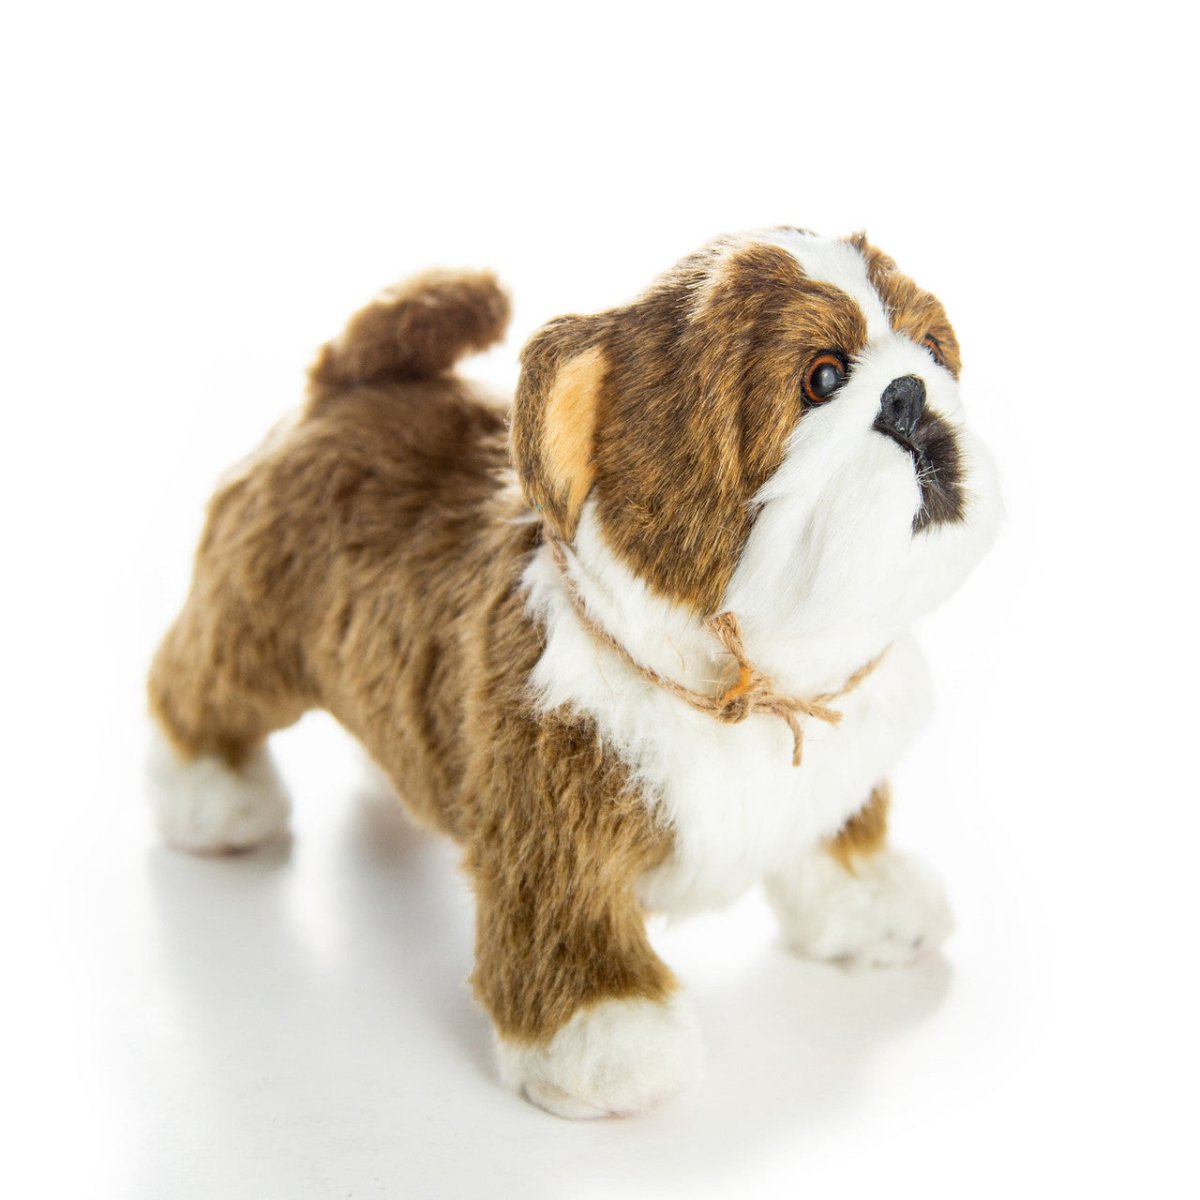 Little House On The Prairie 'Jack The Bulldog' Accessory Pet For 18 Inch Dolls - Simon's Collectibles